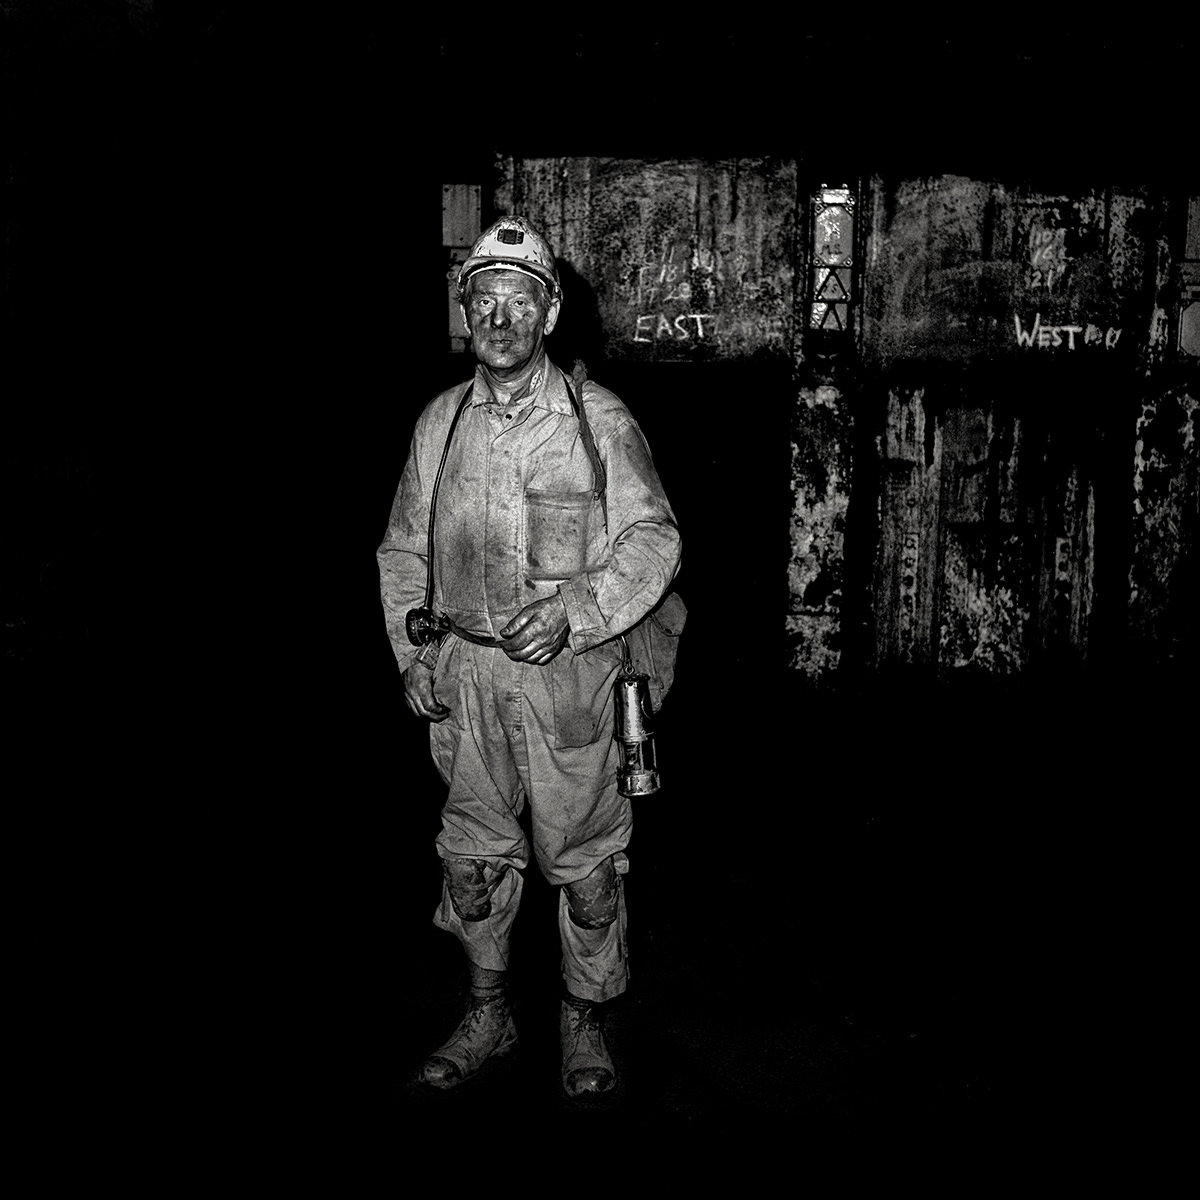 Last Man Out – Woodhorn Colliery 1981